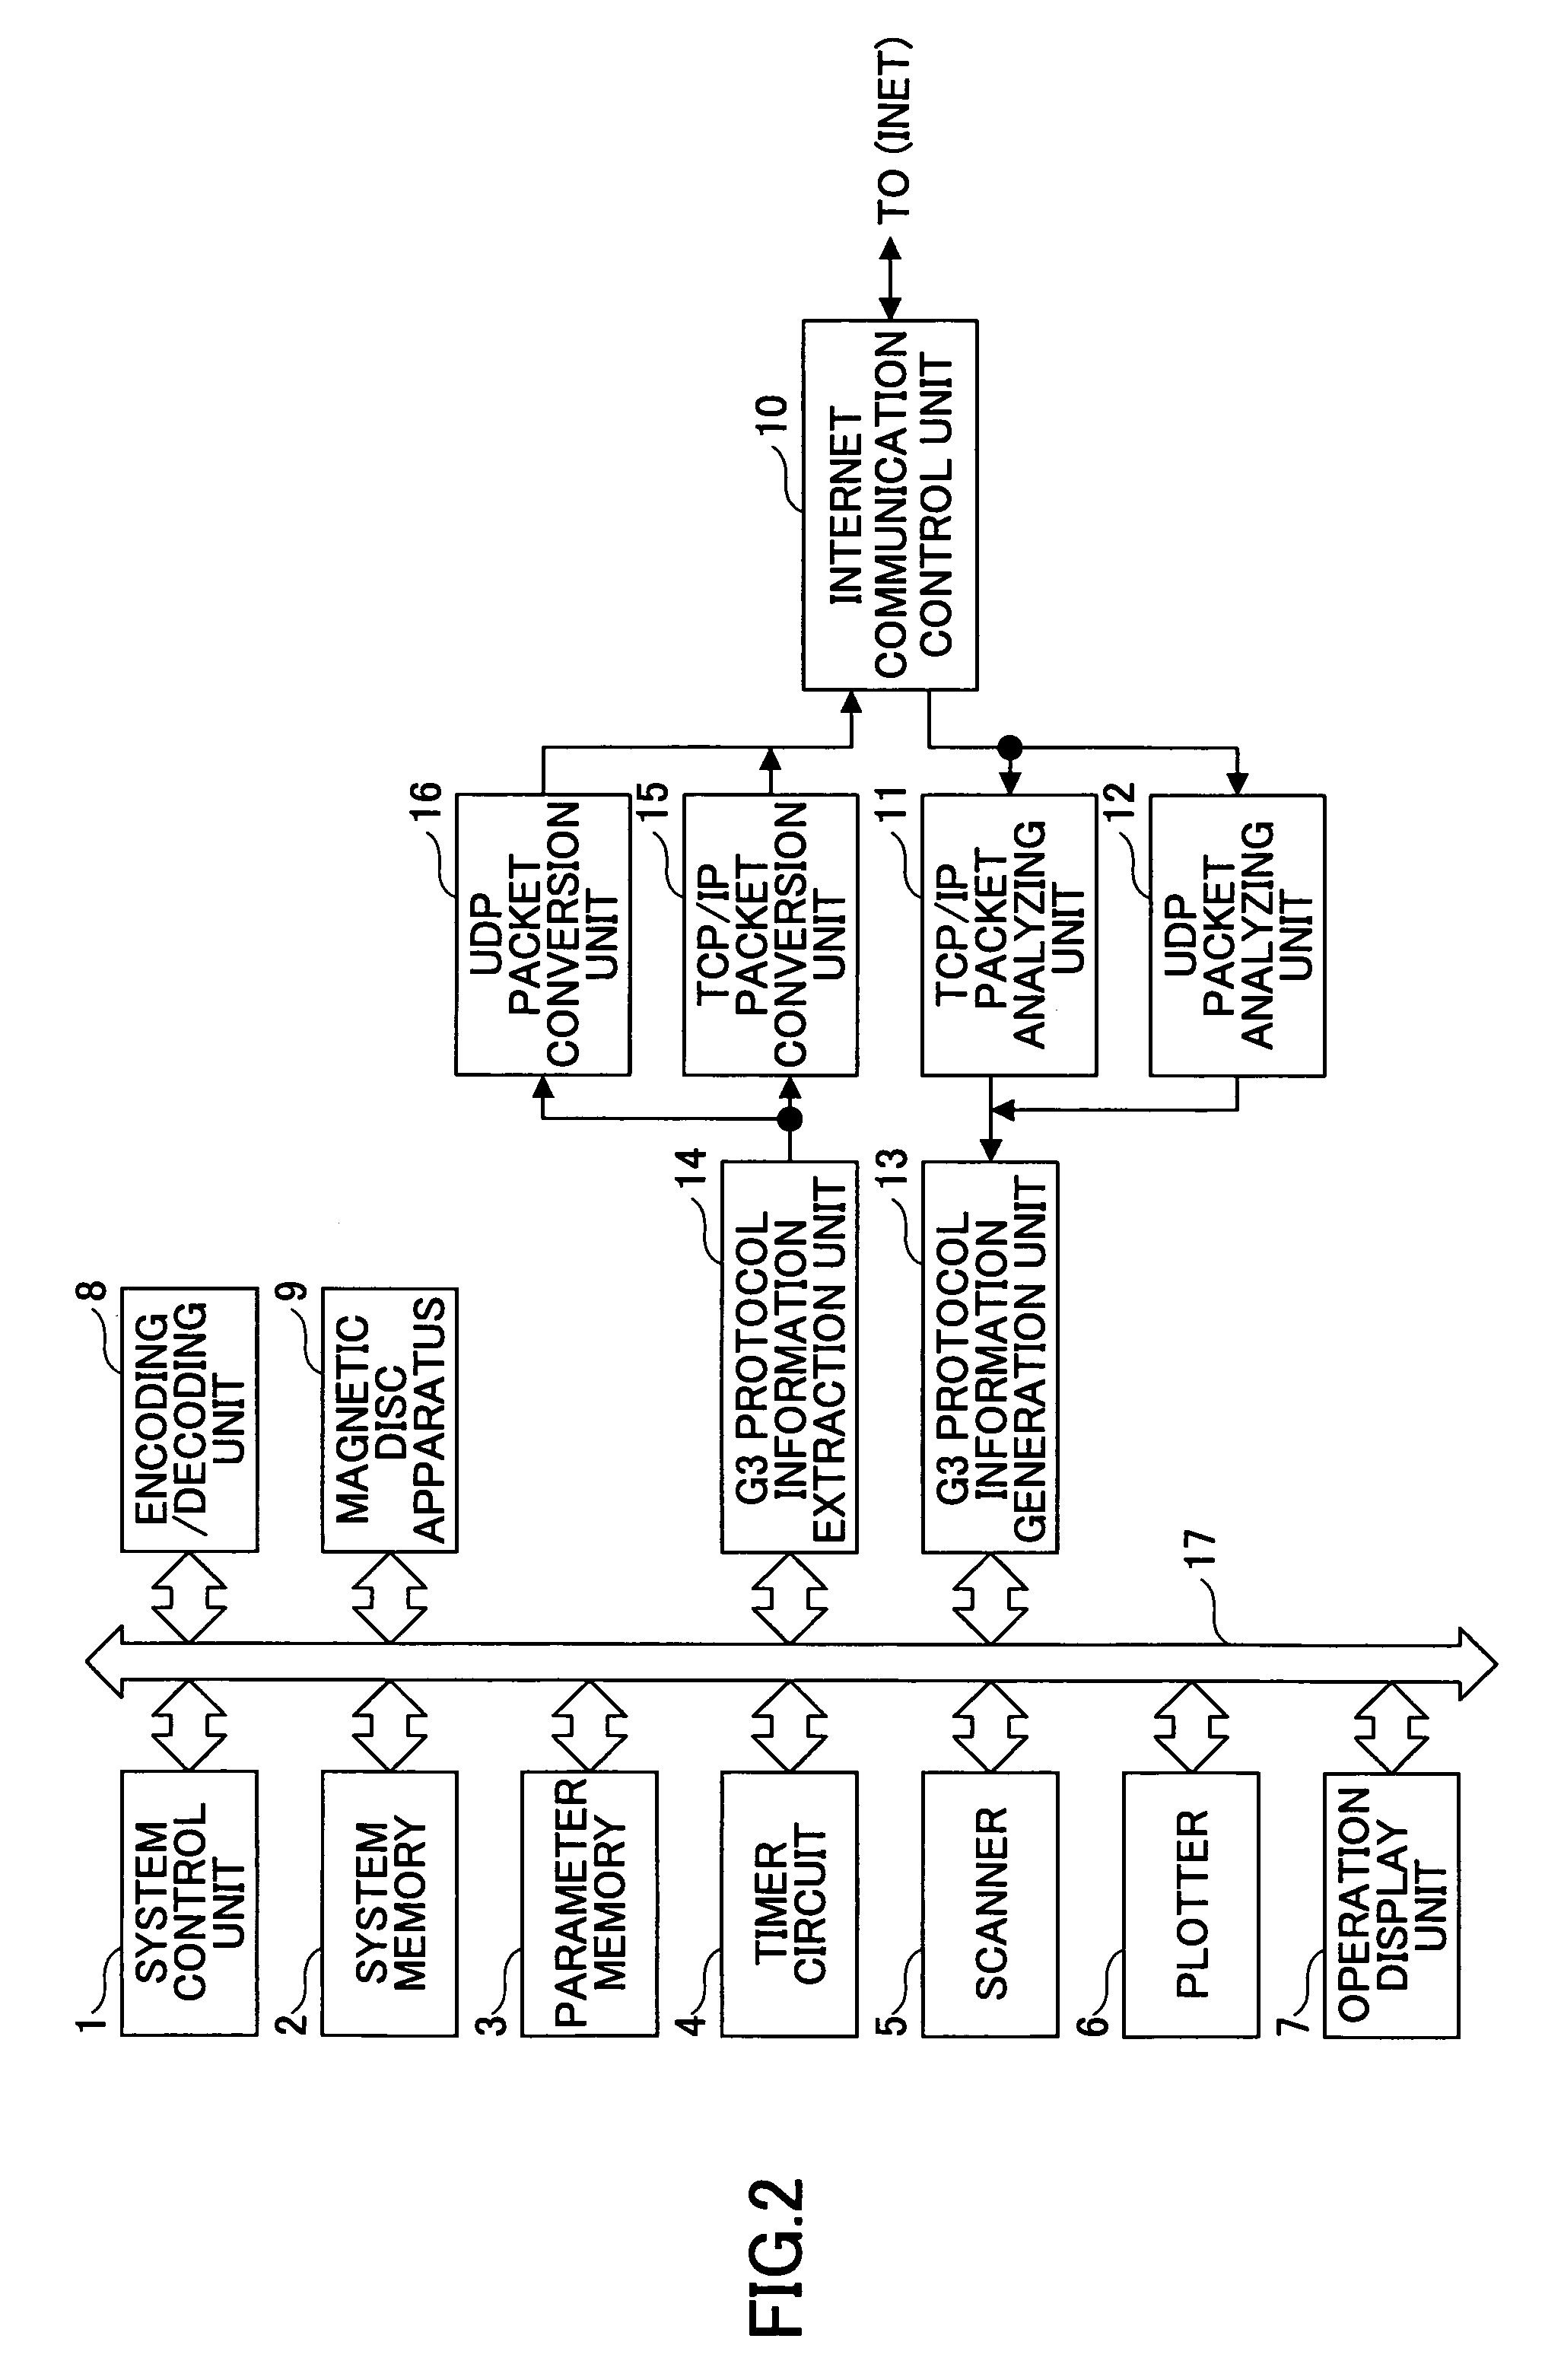 Network communication apparatus and method for performing a T.38 communication function using a voice capability of a gateway apparatus